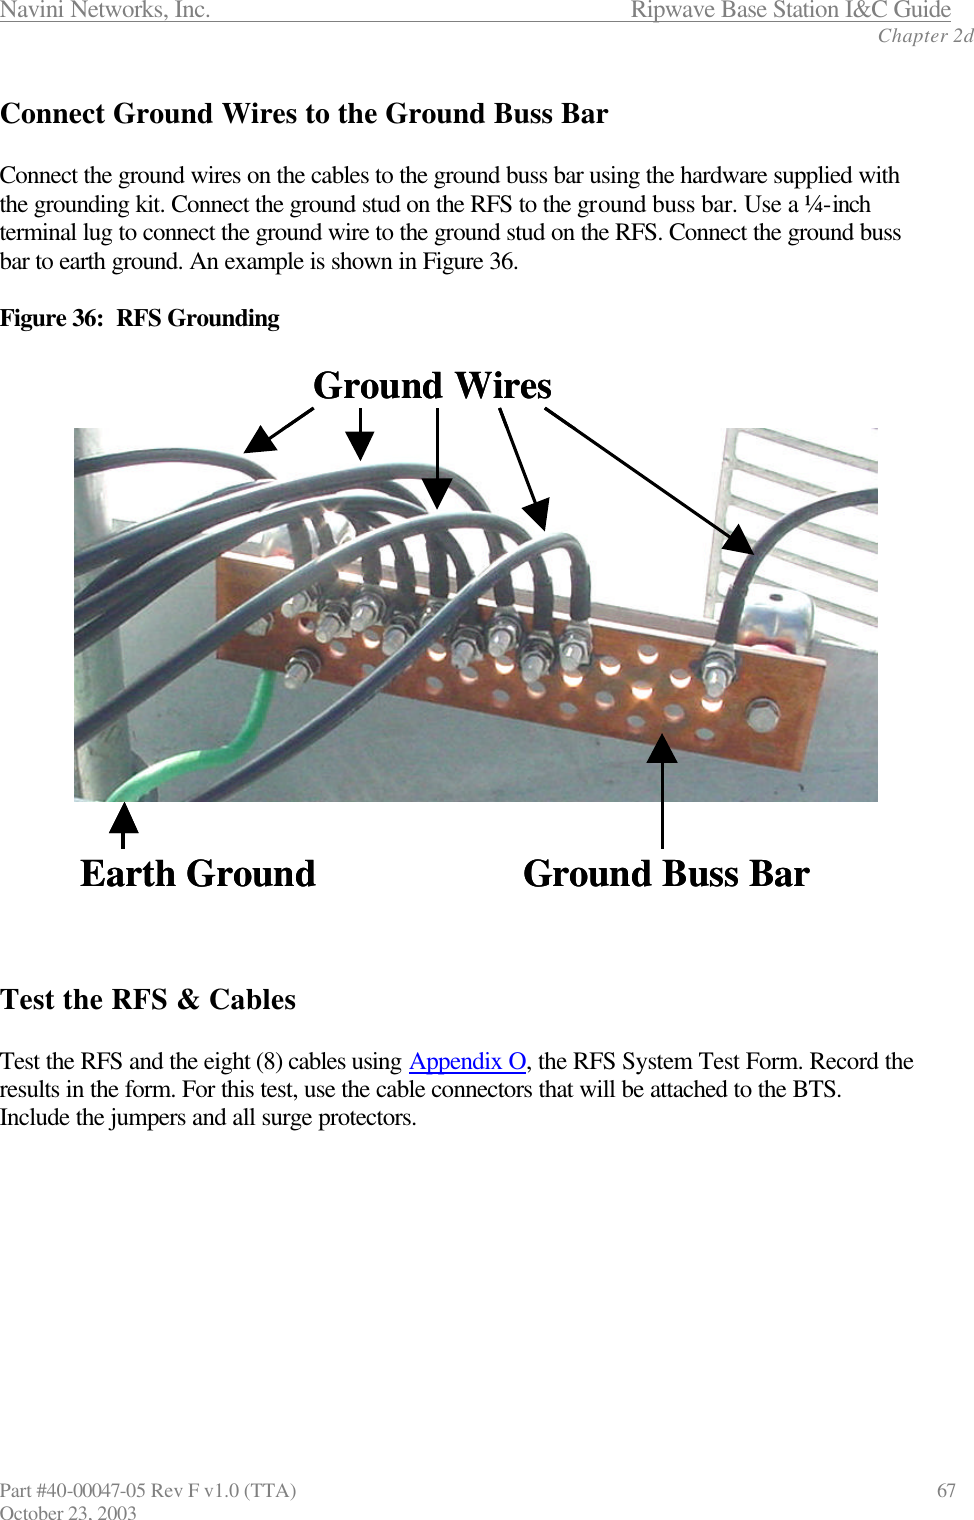 Navini Networks, Inc.                      Ripwave Base Station I&amp;C Guide Chapter 2d Part #40-00047-05 Rev F v1.0 (TTA)                            67 October 23, 2003  Connect Ground Wires to the Ground Buss Bar  Connect the ground wires on the cables to the ground buss bar using the hardware supplied with the grounding kit. Connect the ground stud on the RFS to the ground buss bar. Use a ¼-inch terminal lug to connect the ground wire to the ground stud on the RFS. Connect the ground buss bar to earth ground. An example is shown in Figure 36.  Figure 36:  RFS Grounding    Test the RFS &amp; Cables  Test the RFS and the eight (8) cables using Appendix O, the RFS System Test Form. Record the results in the form. For this test, use the cable connectors that will be attached to the BTS. Include the jumpers and all surge protectors. Ground Buss BarGround WiresEarth Ground Ground Buss BarGround WiresEarth Ground